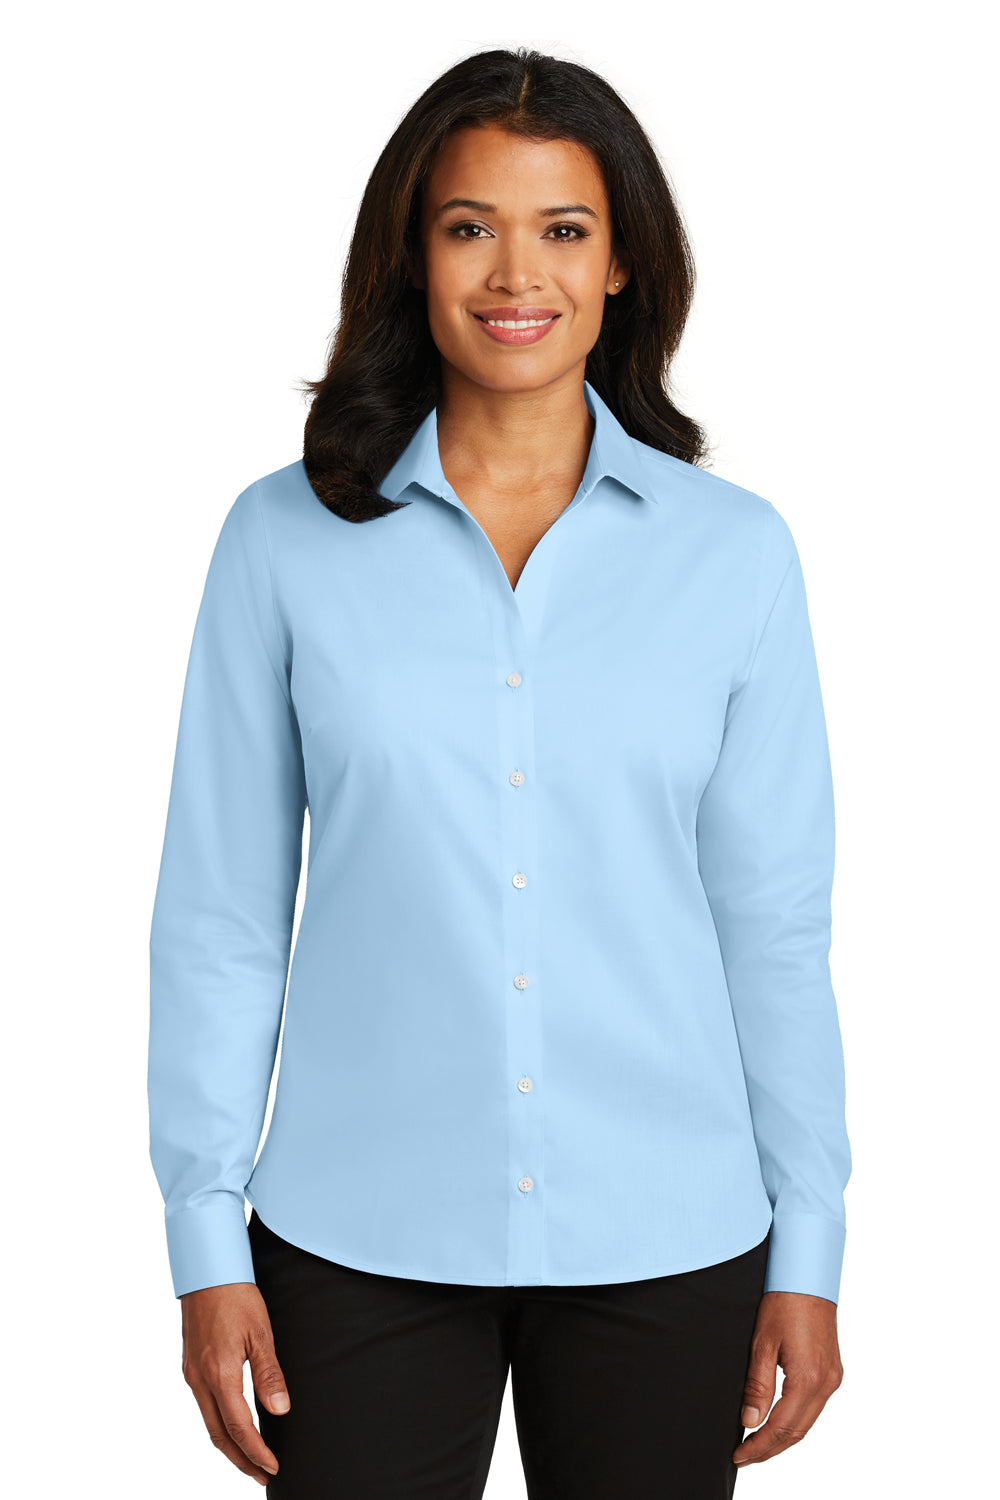 Red House RH79 Womens Wrinkle Resistant Long Sleeve Button Down Shirt Heritage Blue Front